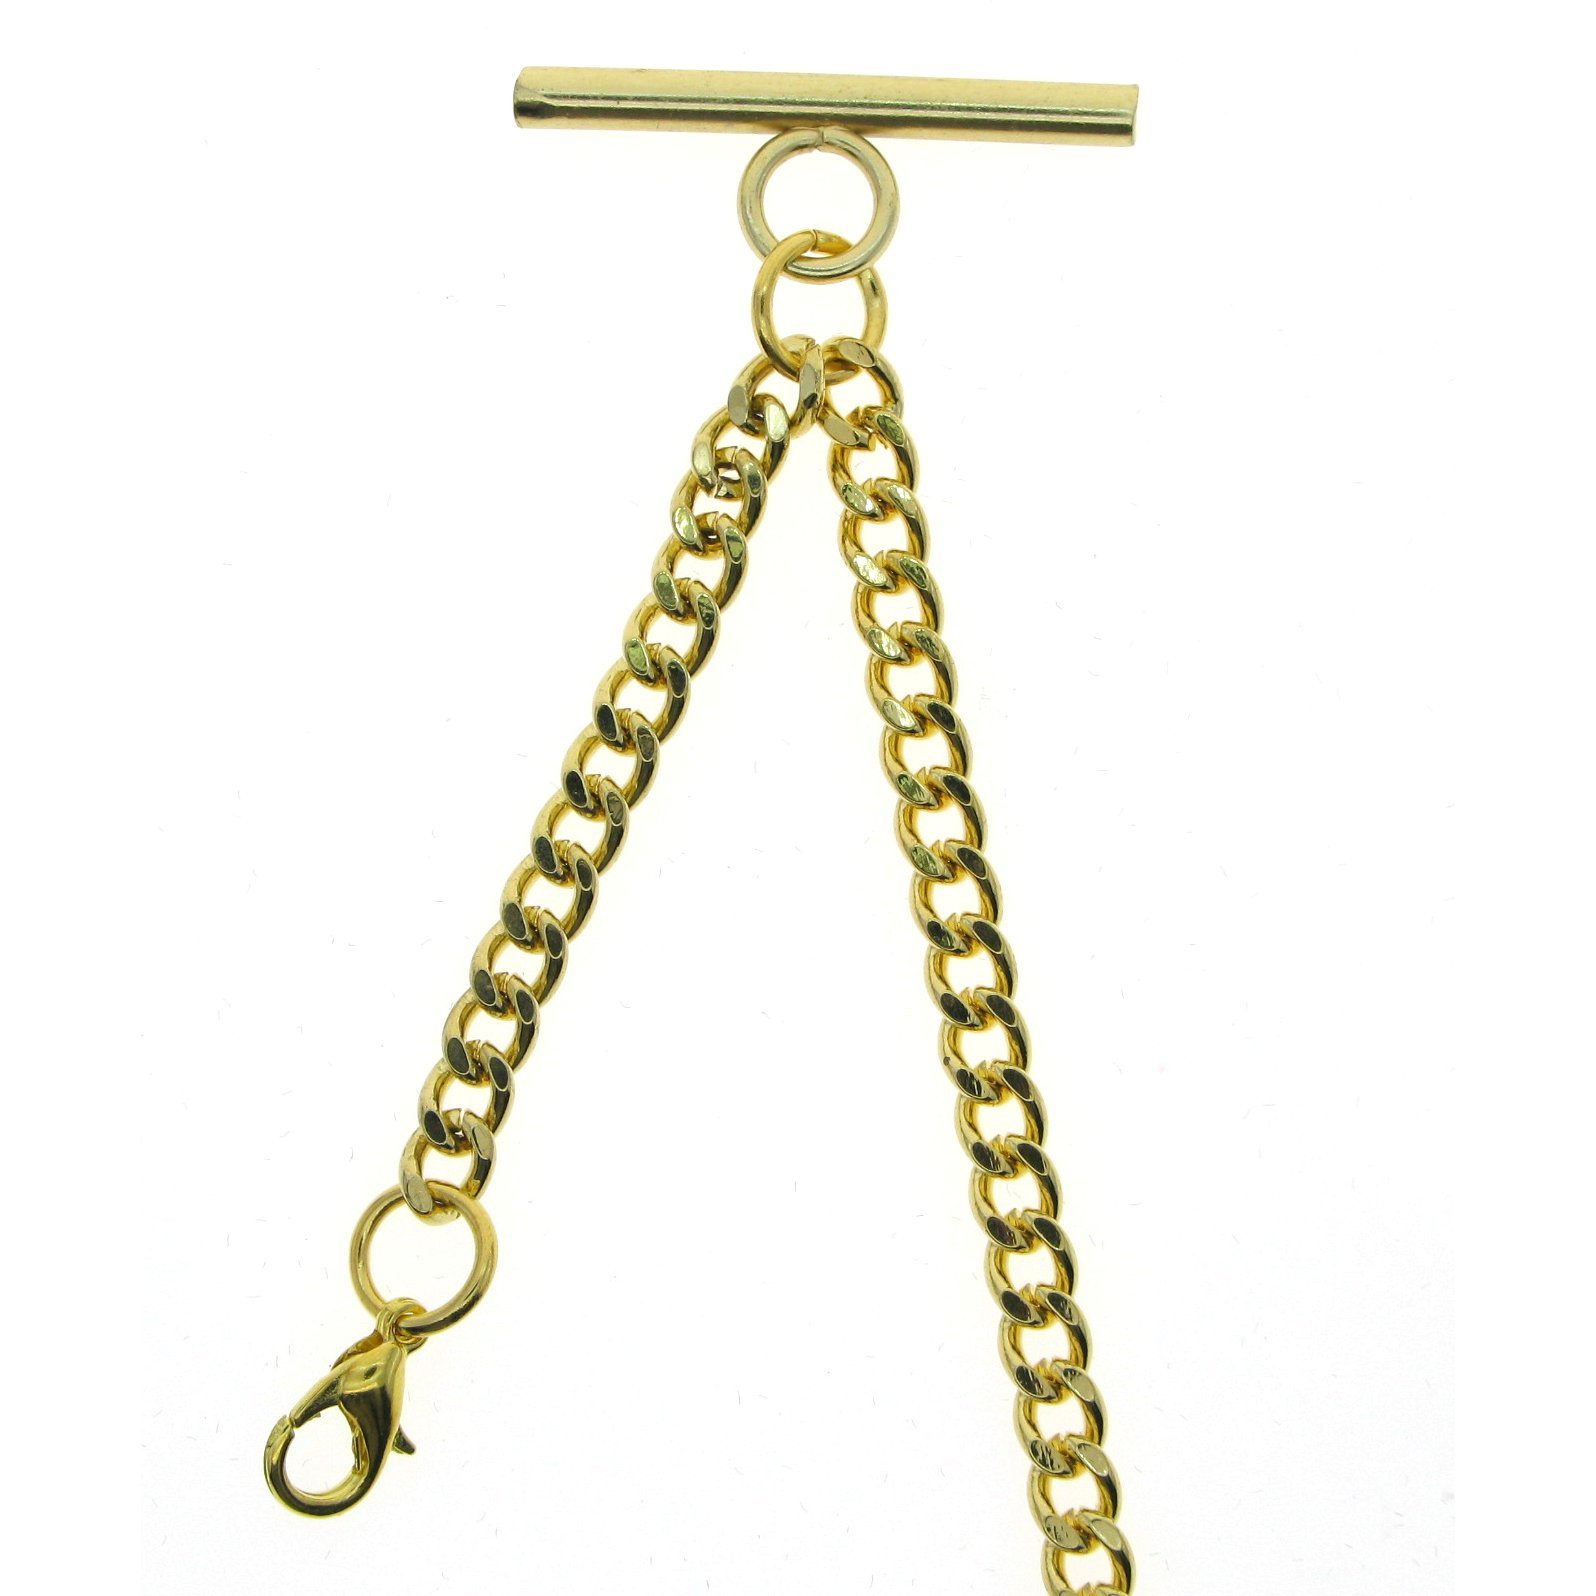 Albert Chain Gold Color Pocket Watch Chains for Men with T Bar Swivel Clasp and Lobster Clasp AC33